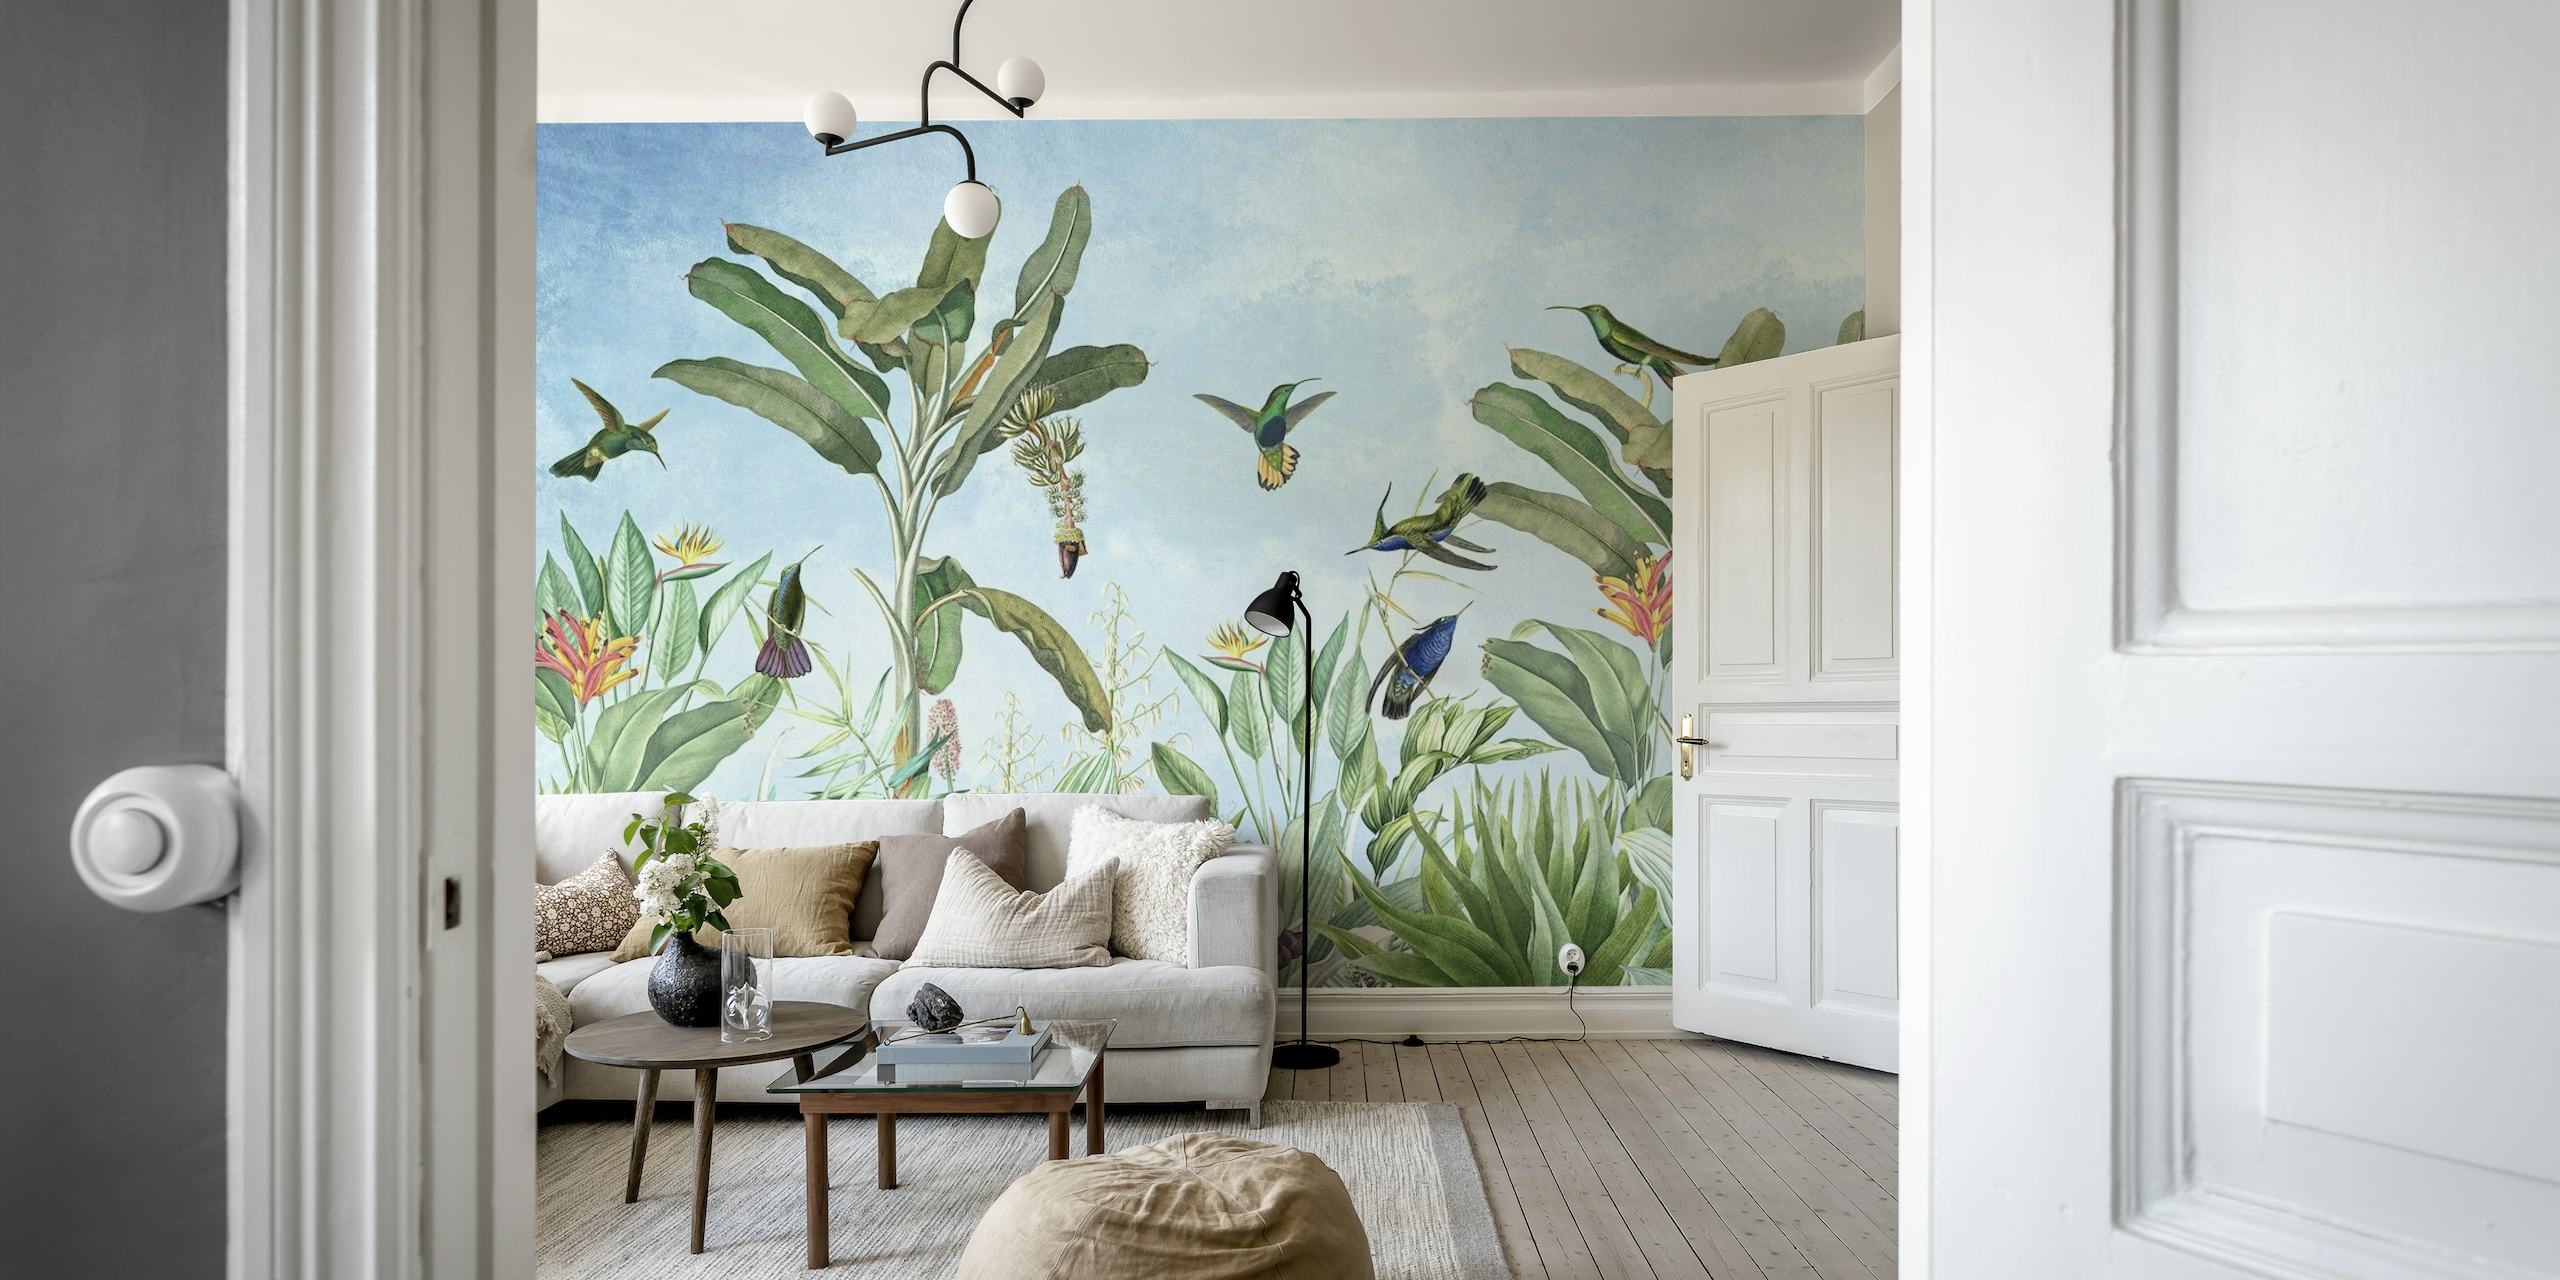 Exotic Vintage Hummingbird and Plants Wall Mural design.